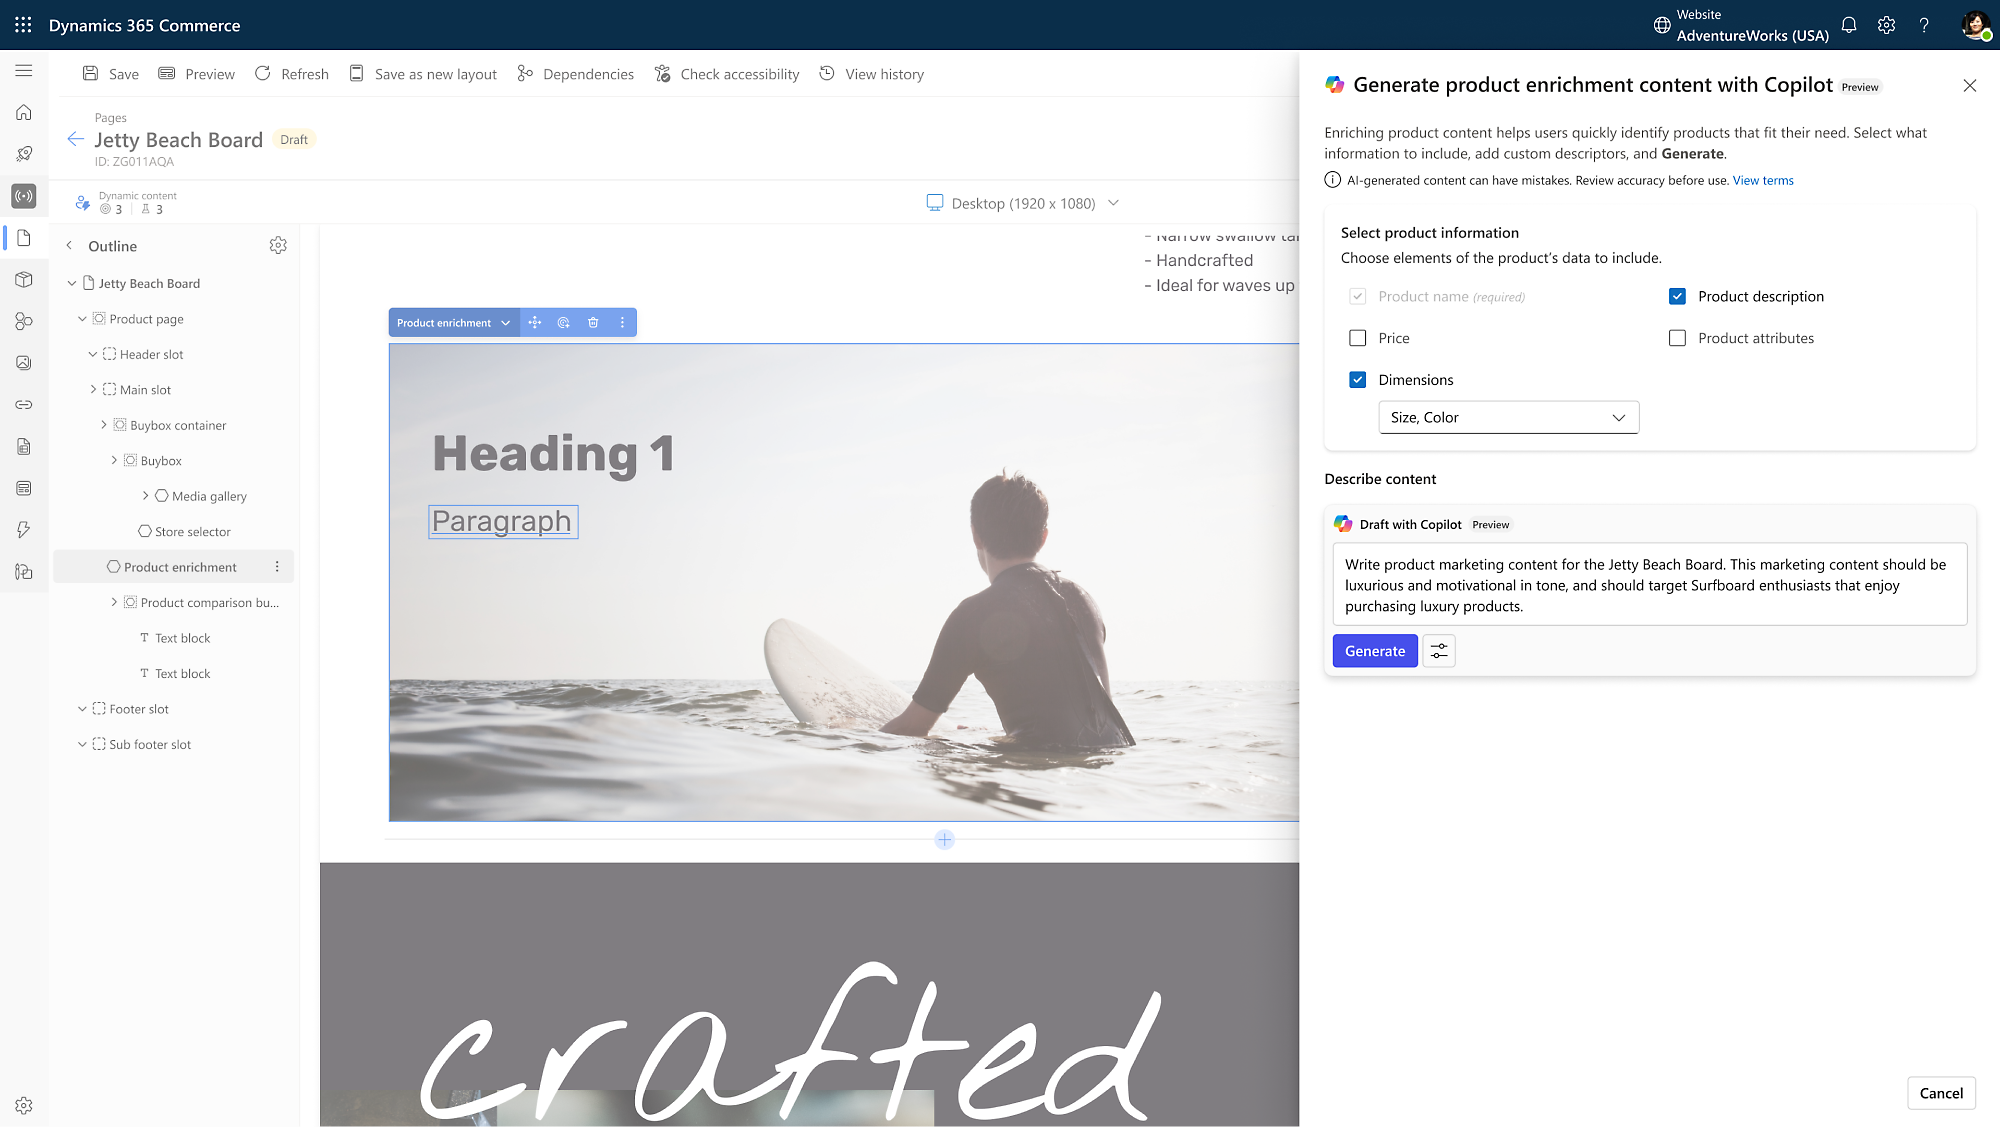 Screenshot of Dynamics 365 Commerce interface with options for product enrichment and marketing content generation for Jetty Beach Board surfboards.